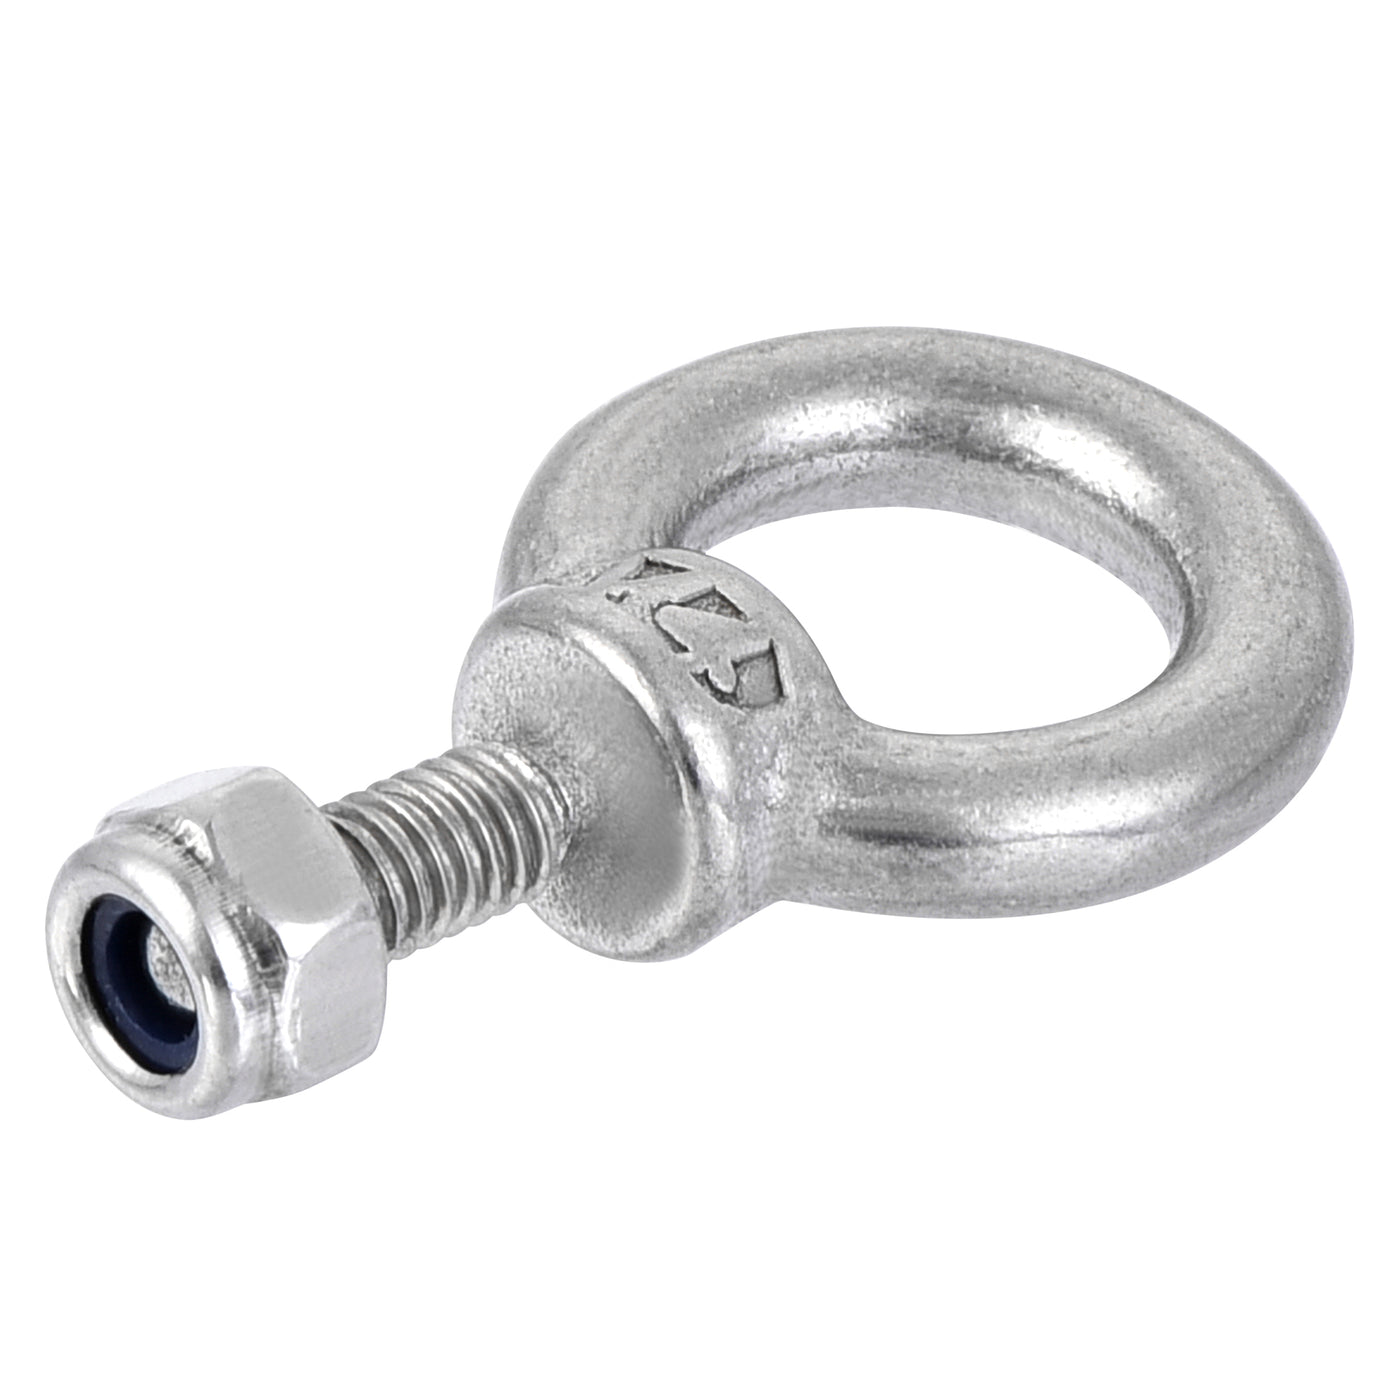 uxcell Uxcell Lifting Eye Bolt M4 x 11mm Male Thread with Hex Screw Nut for Hanging, 304 Stainless Steel, 4 Sets